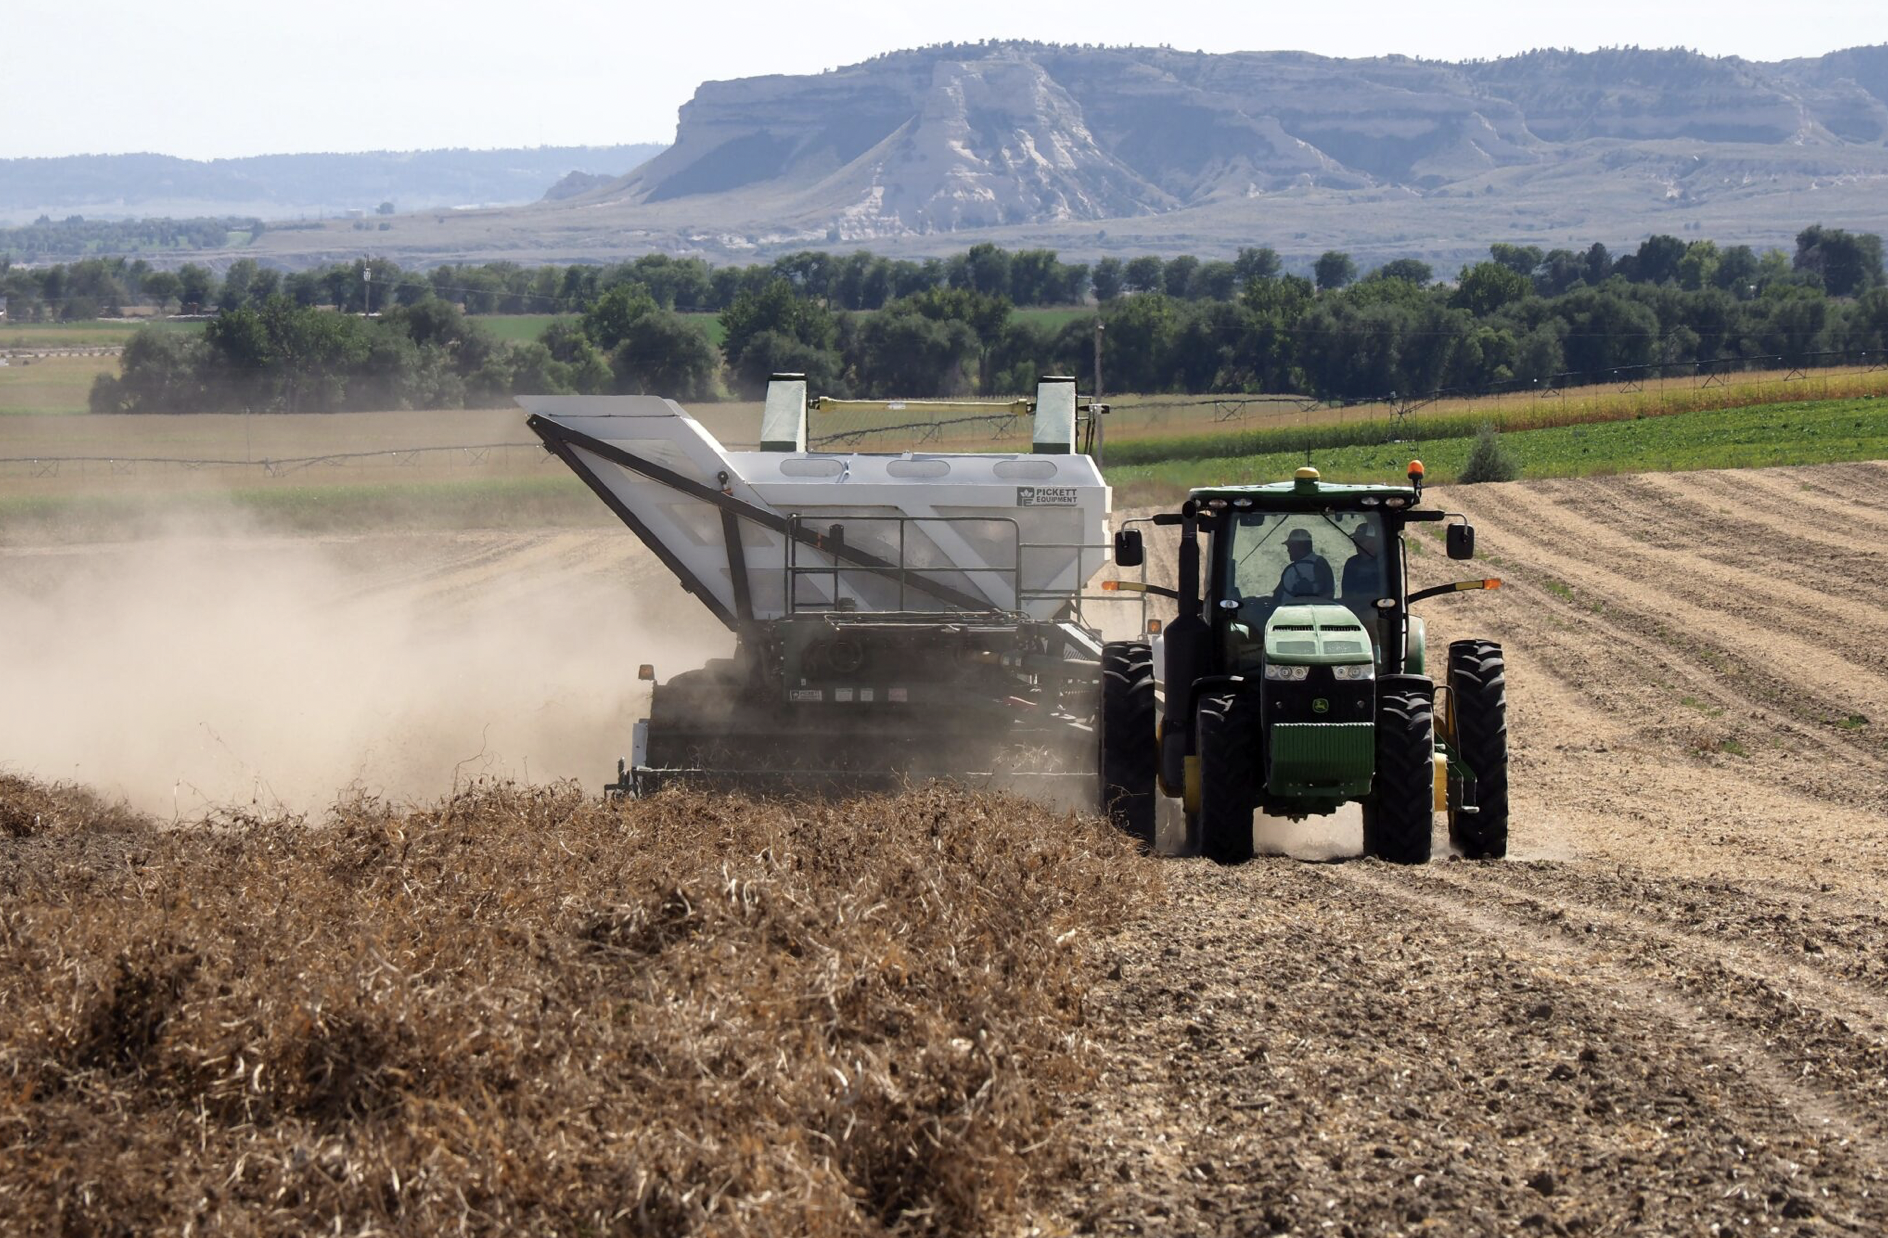 TOPSOIL PROTECTION SHOULD BE STRESSED IN NEXT FARM BILL, U.S. HOUSE AG PANEL TOLD